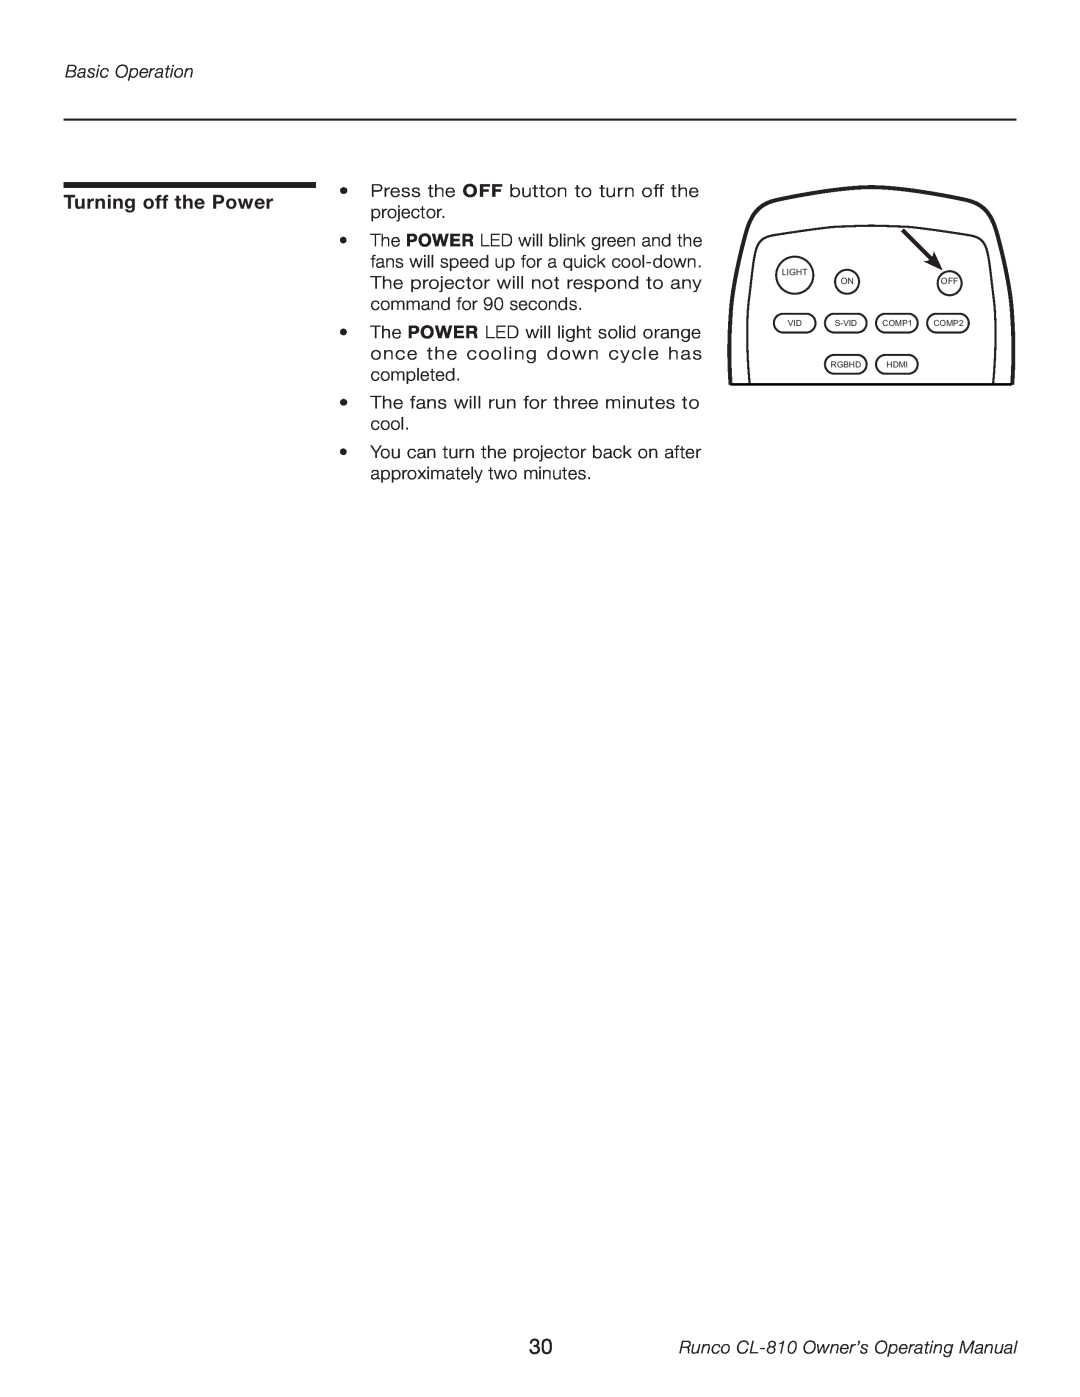 Runco manual Turning off the Power, Basic Operation, Runco CL-810 Owner’s Operating Manual 